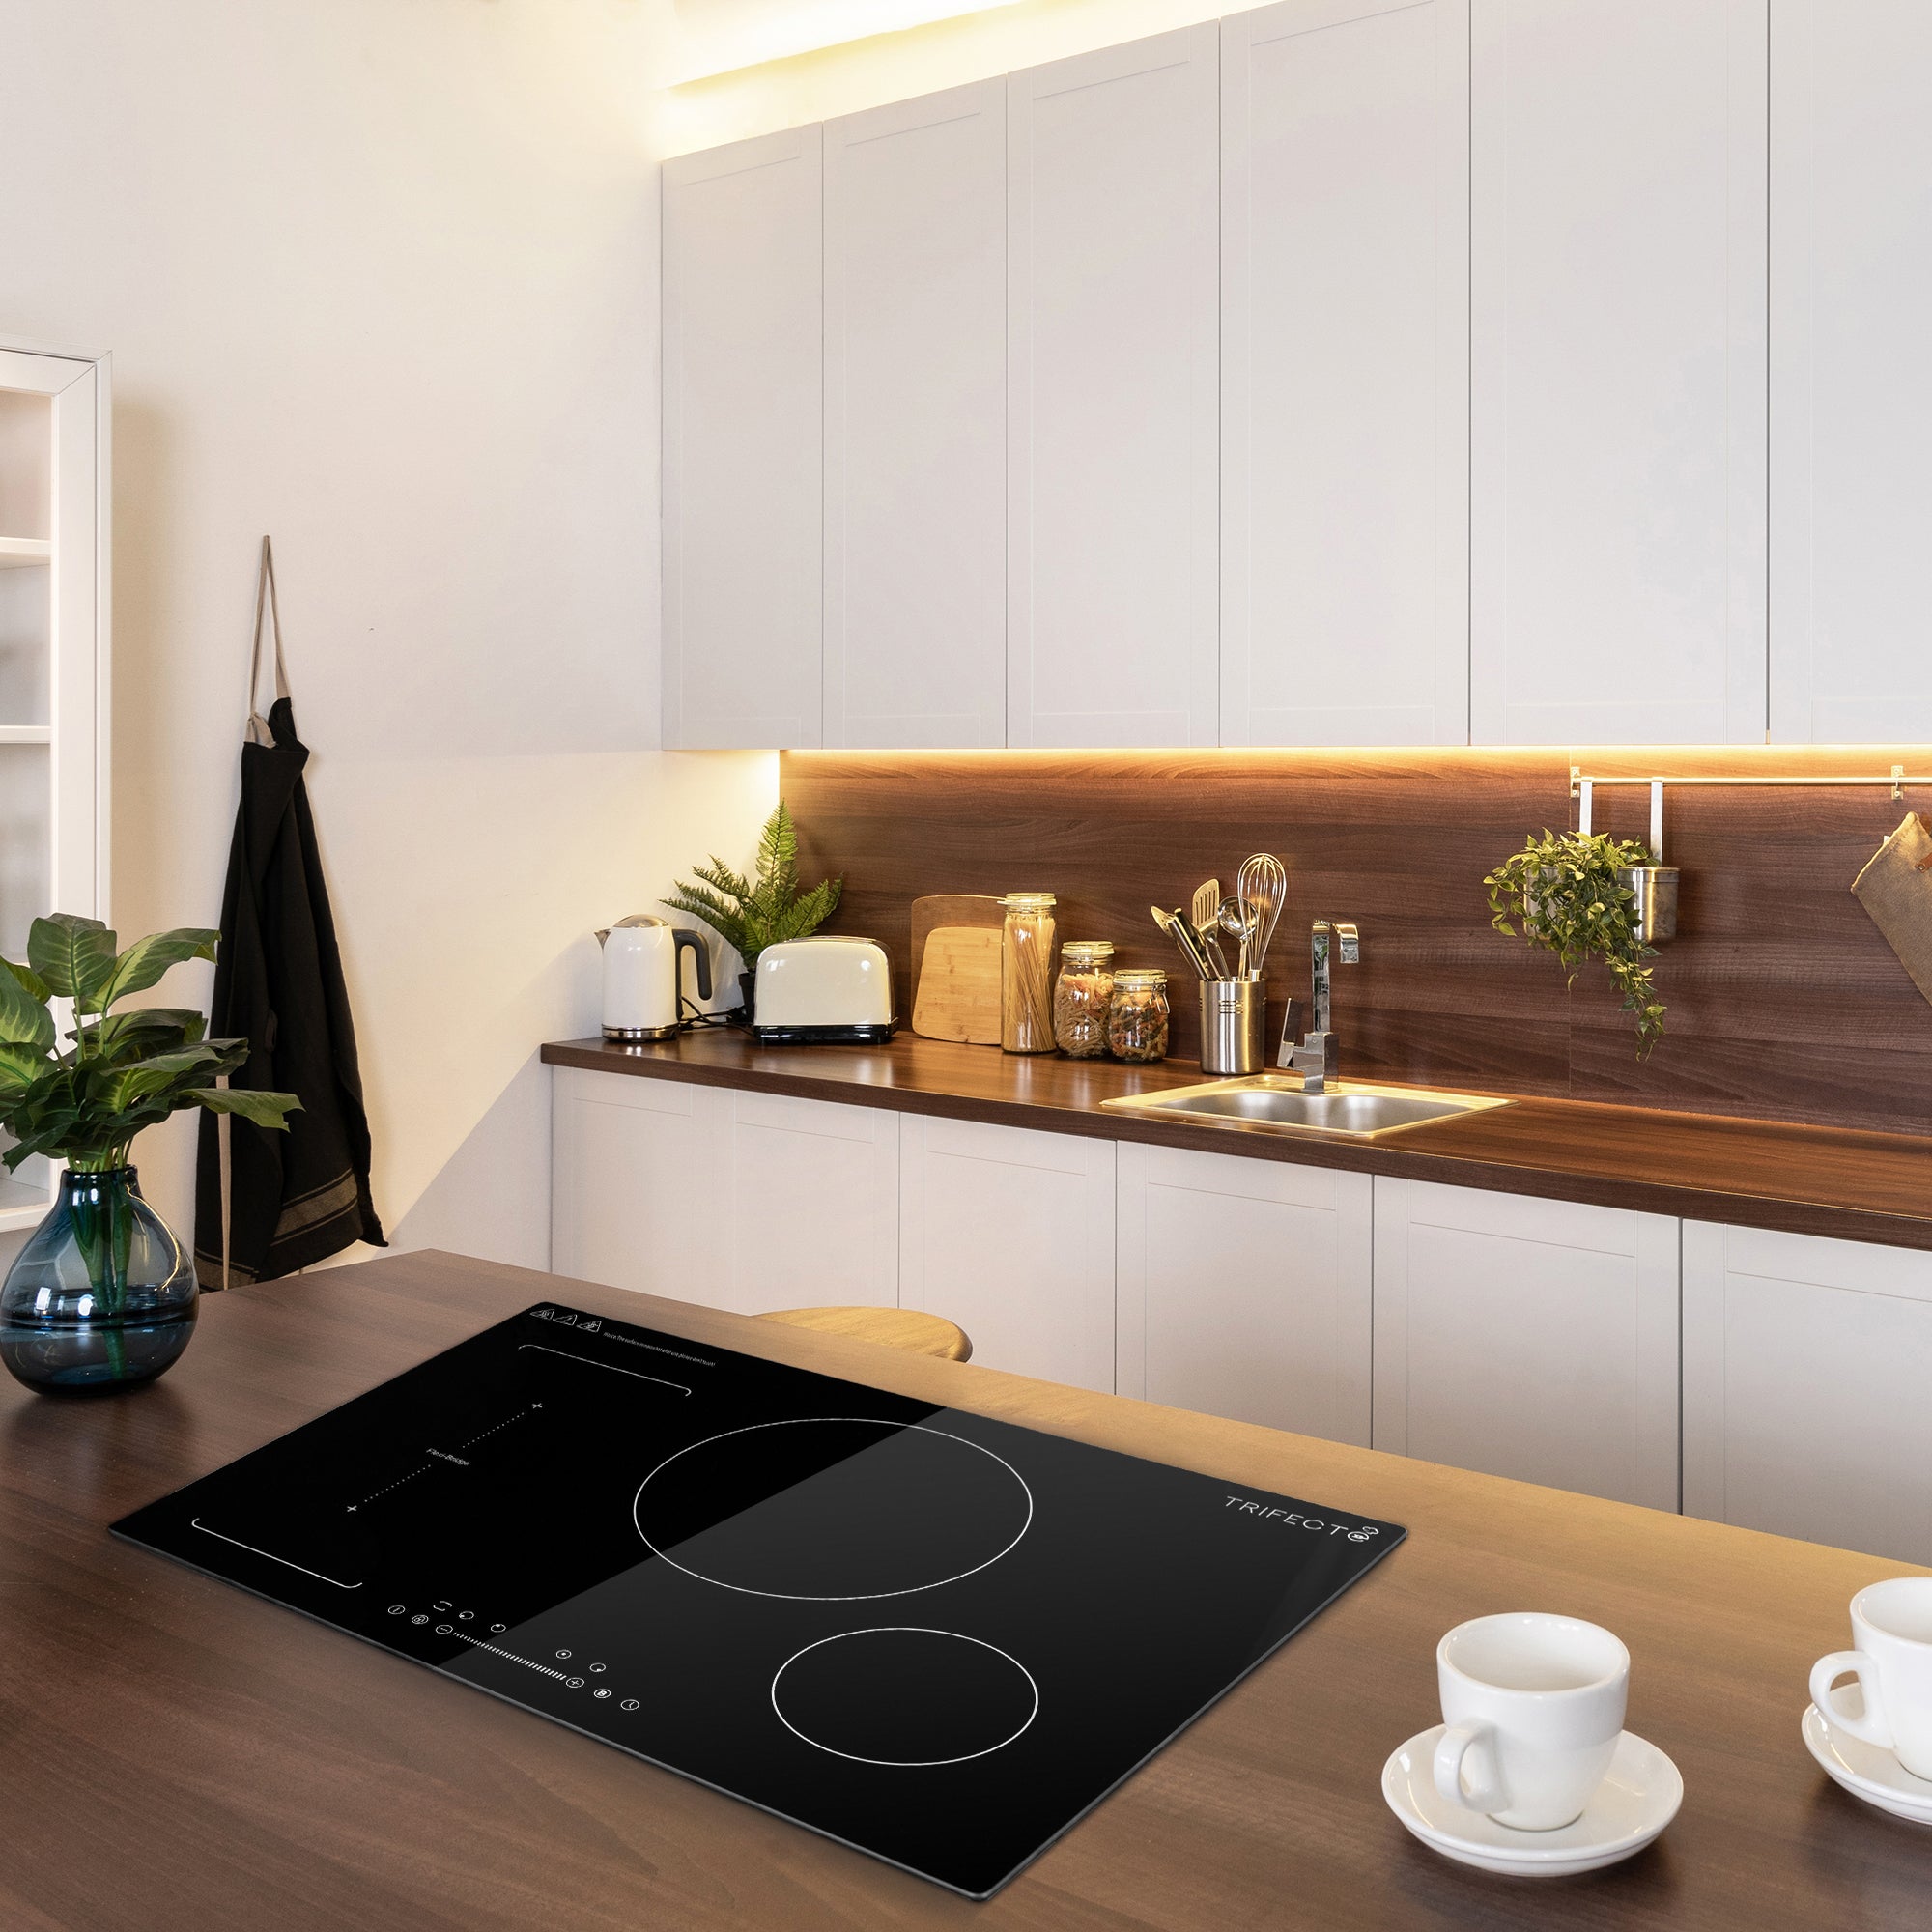 The 30-inch built-in induction cooker matches with wood grain kitchen top makes the kitchen interior design more idyllic